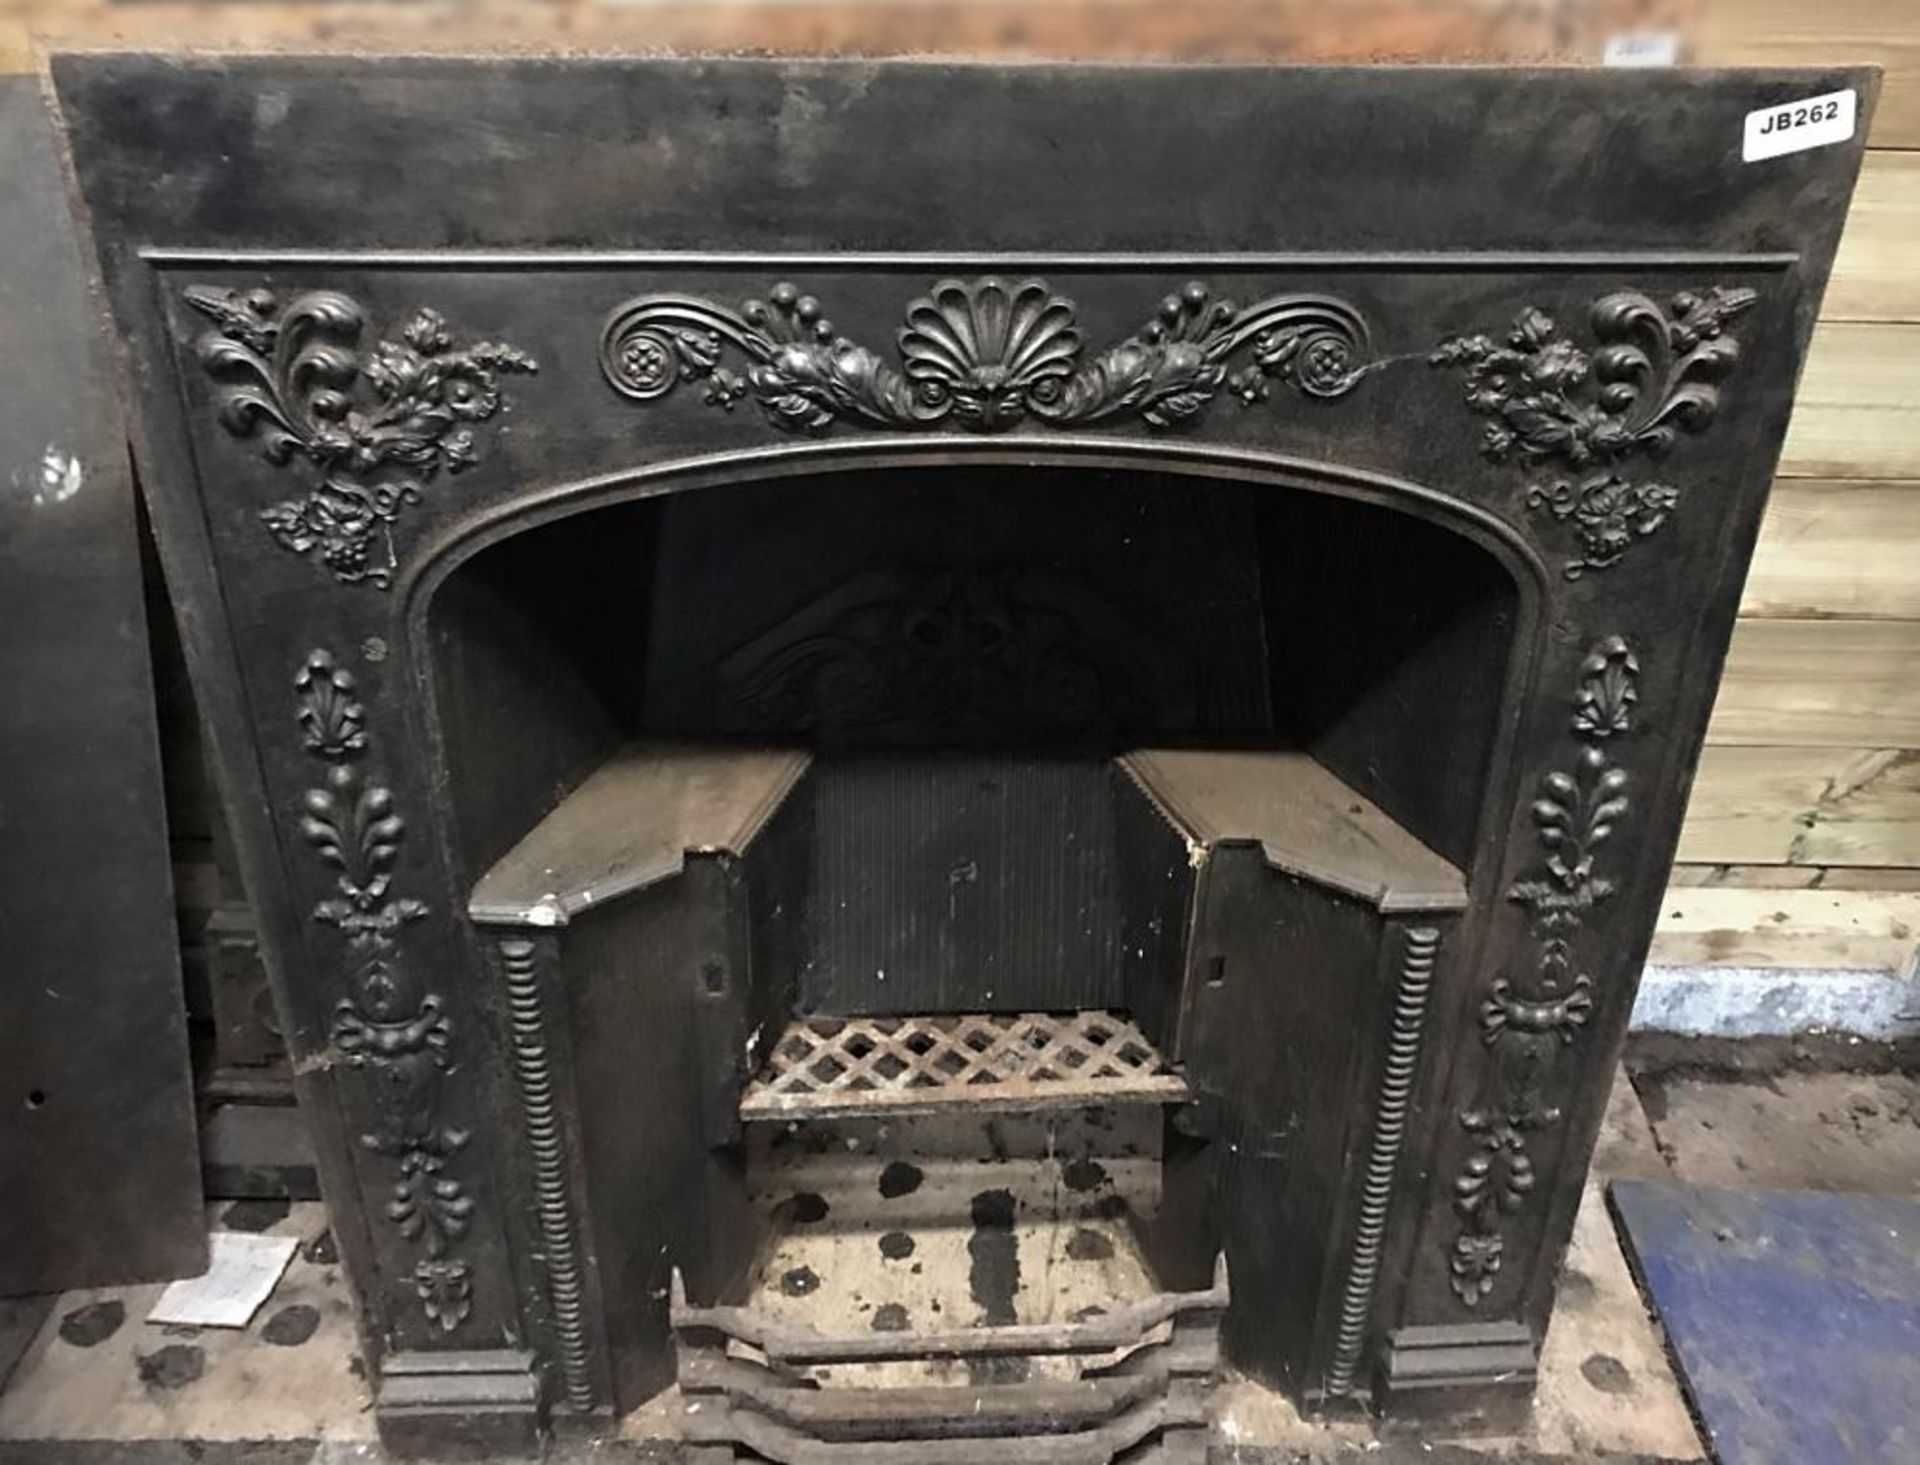 1 x Antique Victorian Cast Iron Fire Insert With Patterned Surround - Dimensions: Width 82cm x